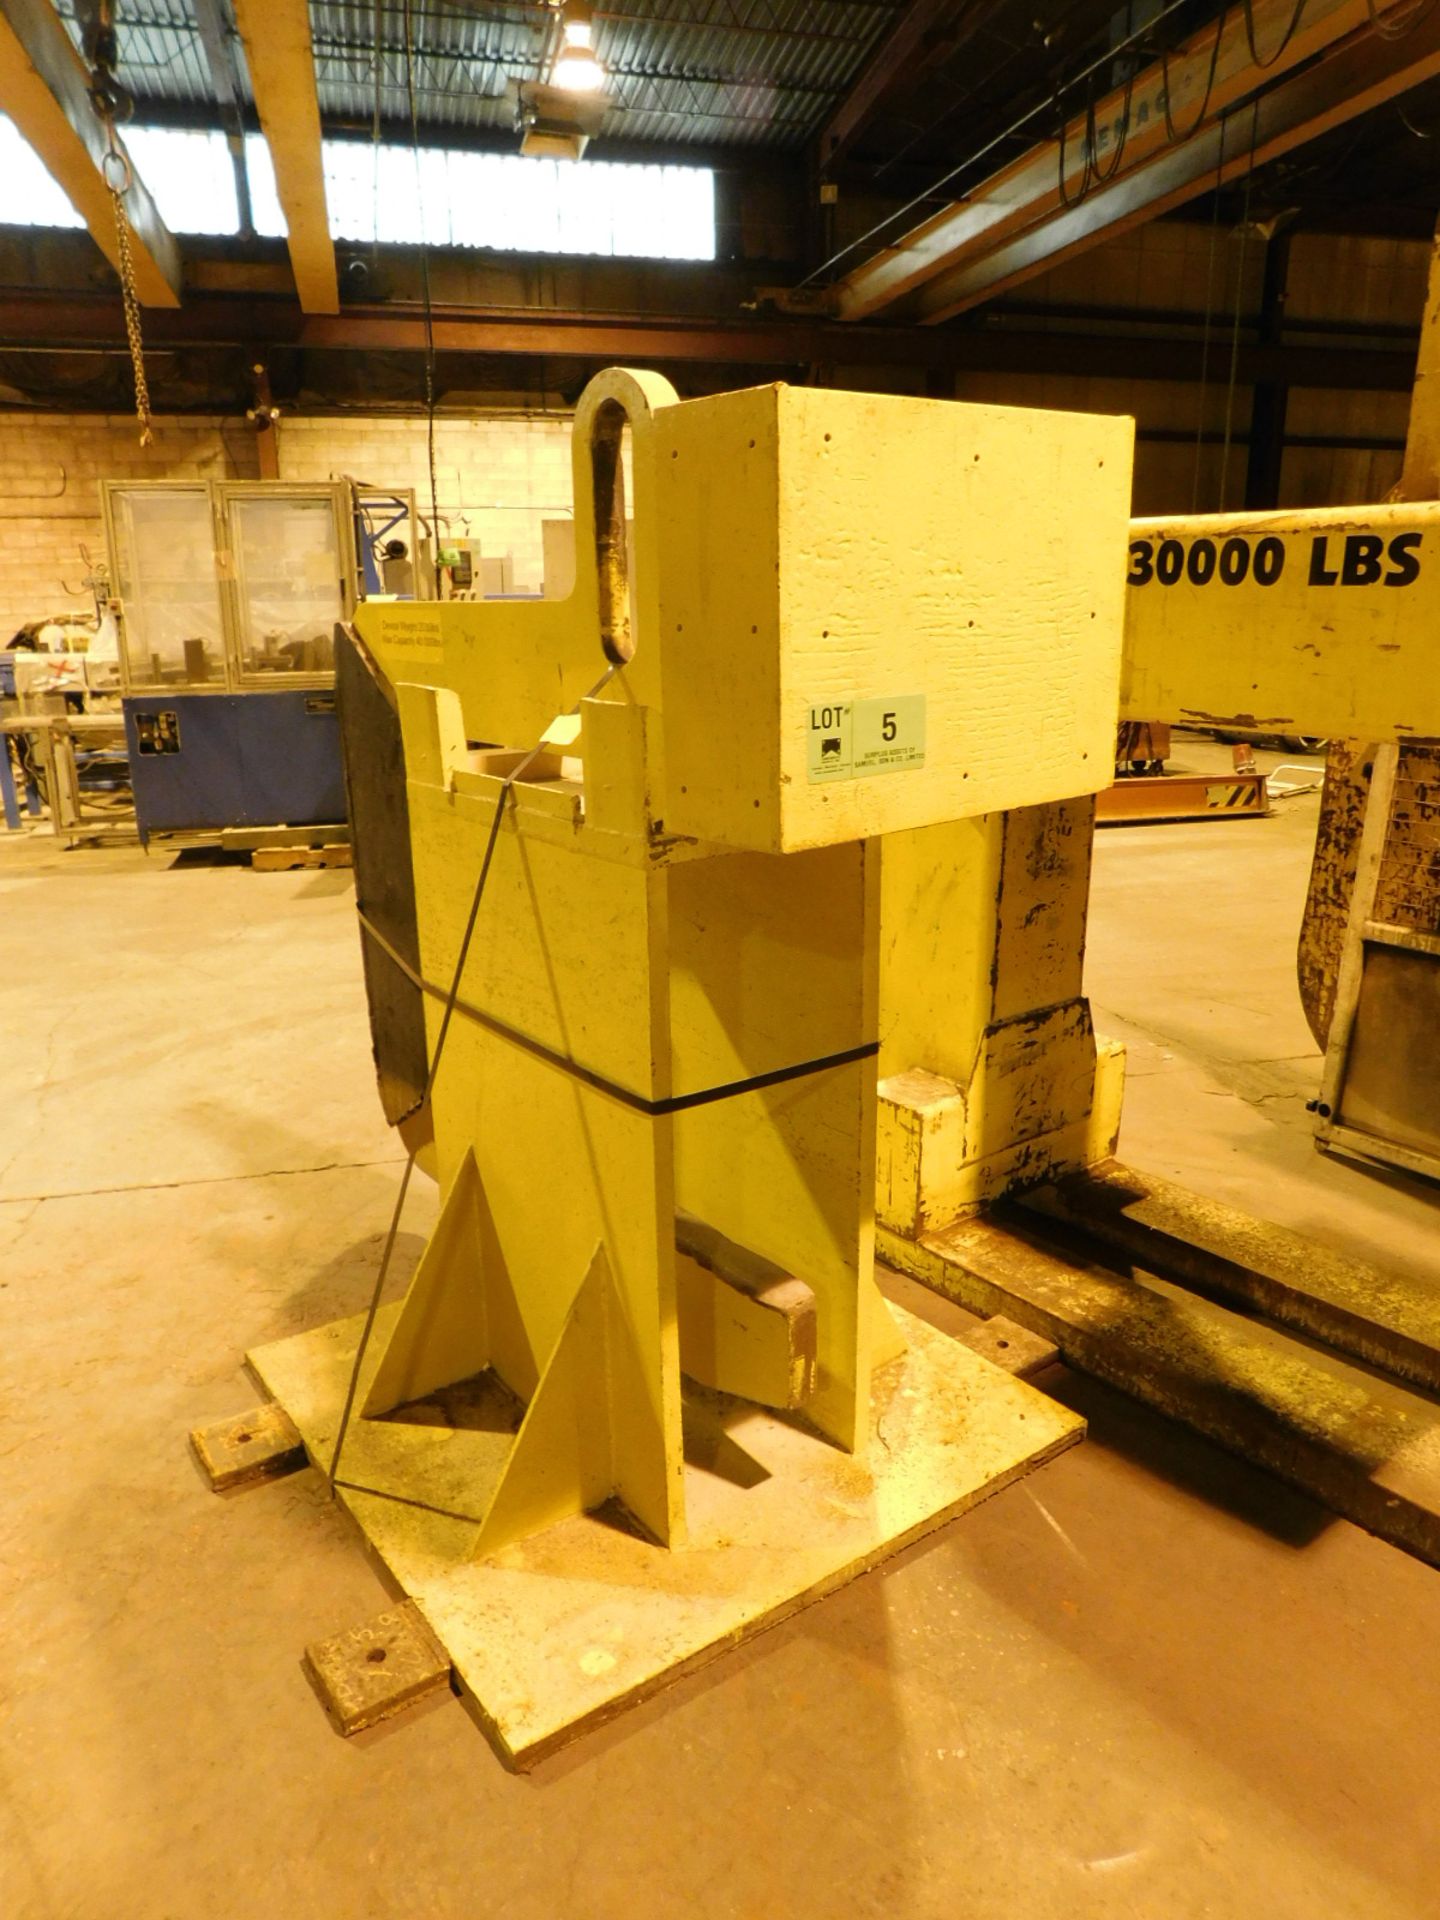 40,000LB CAPACITY 'C' HOOK WITH STAND (BUILDING 1)